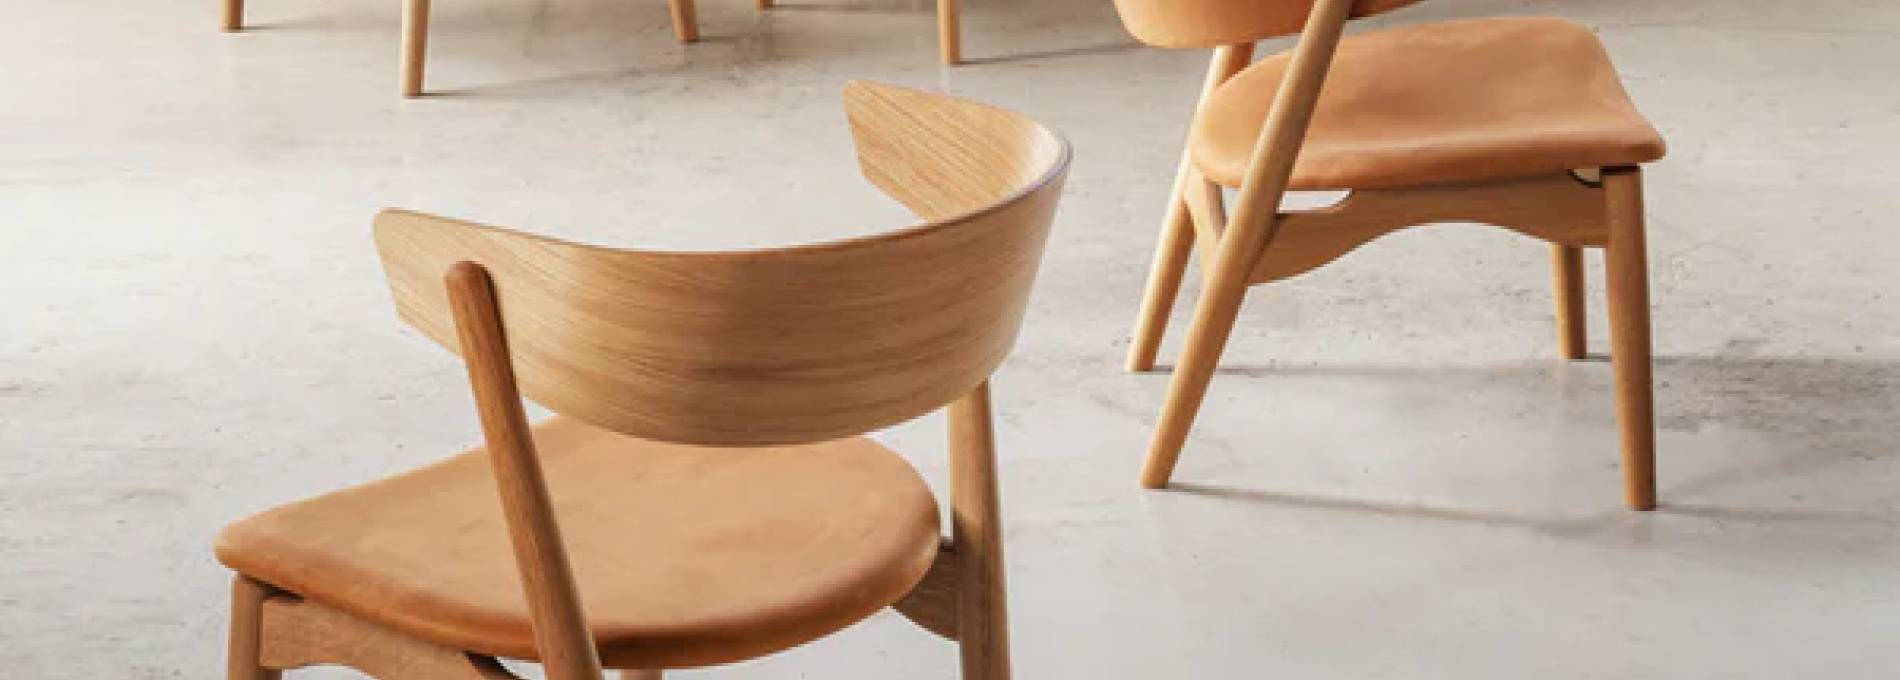 20% off Sibast No 7 Lounge table and chairs